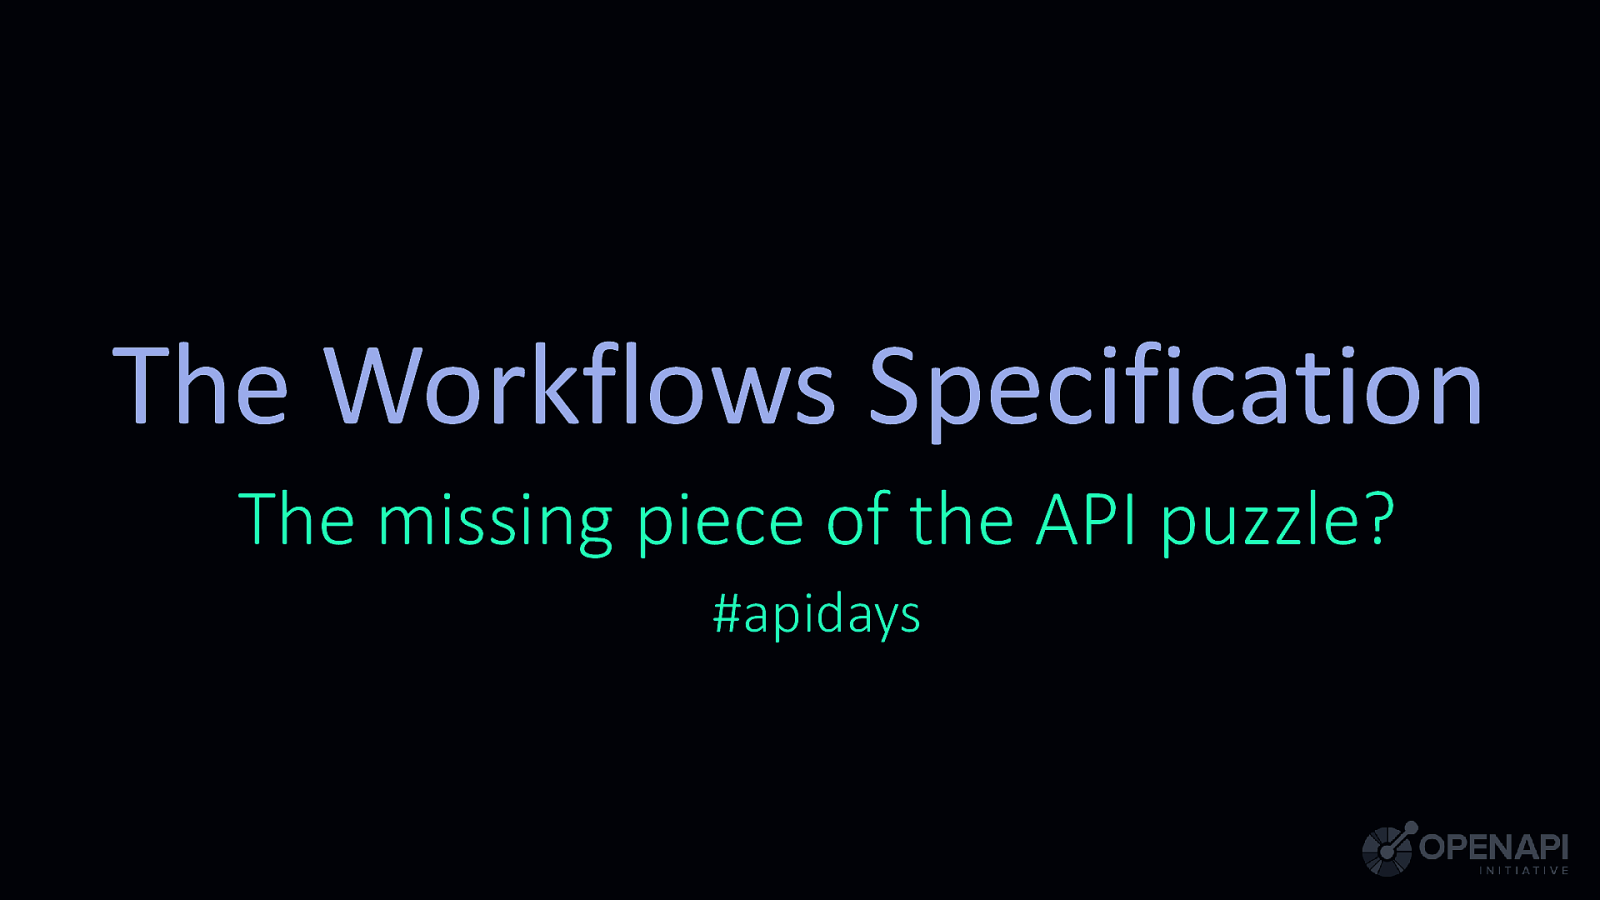 The Workflows Specification - The missing piece of the API puzzle?